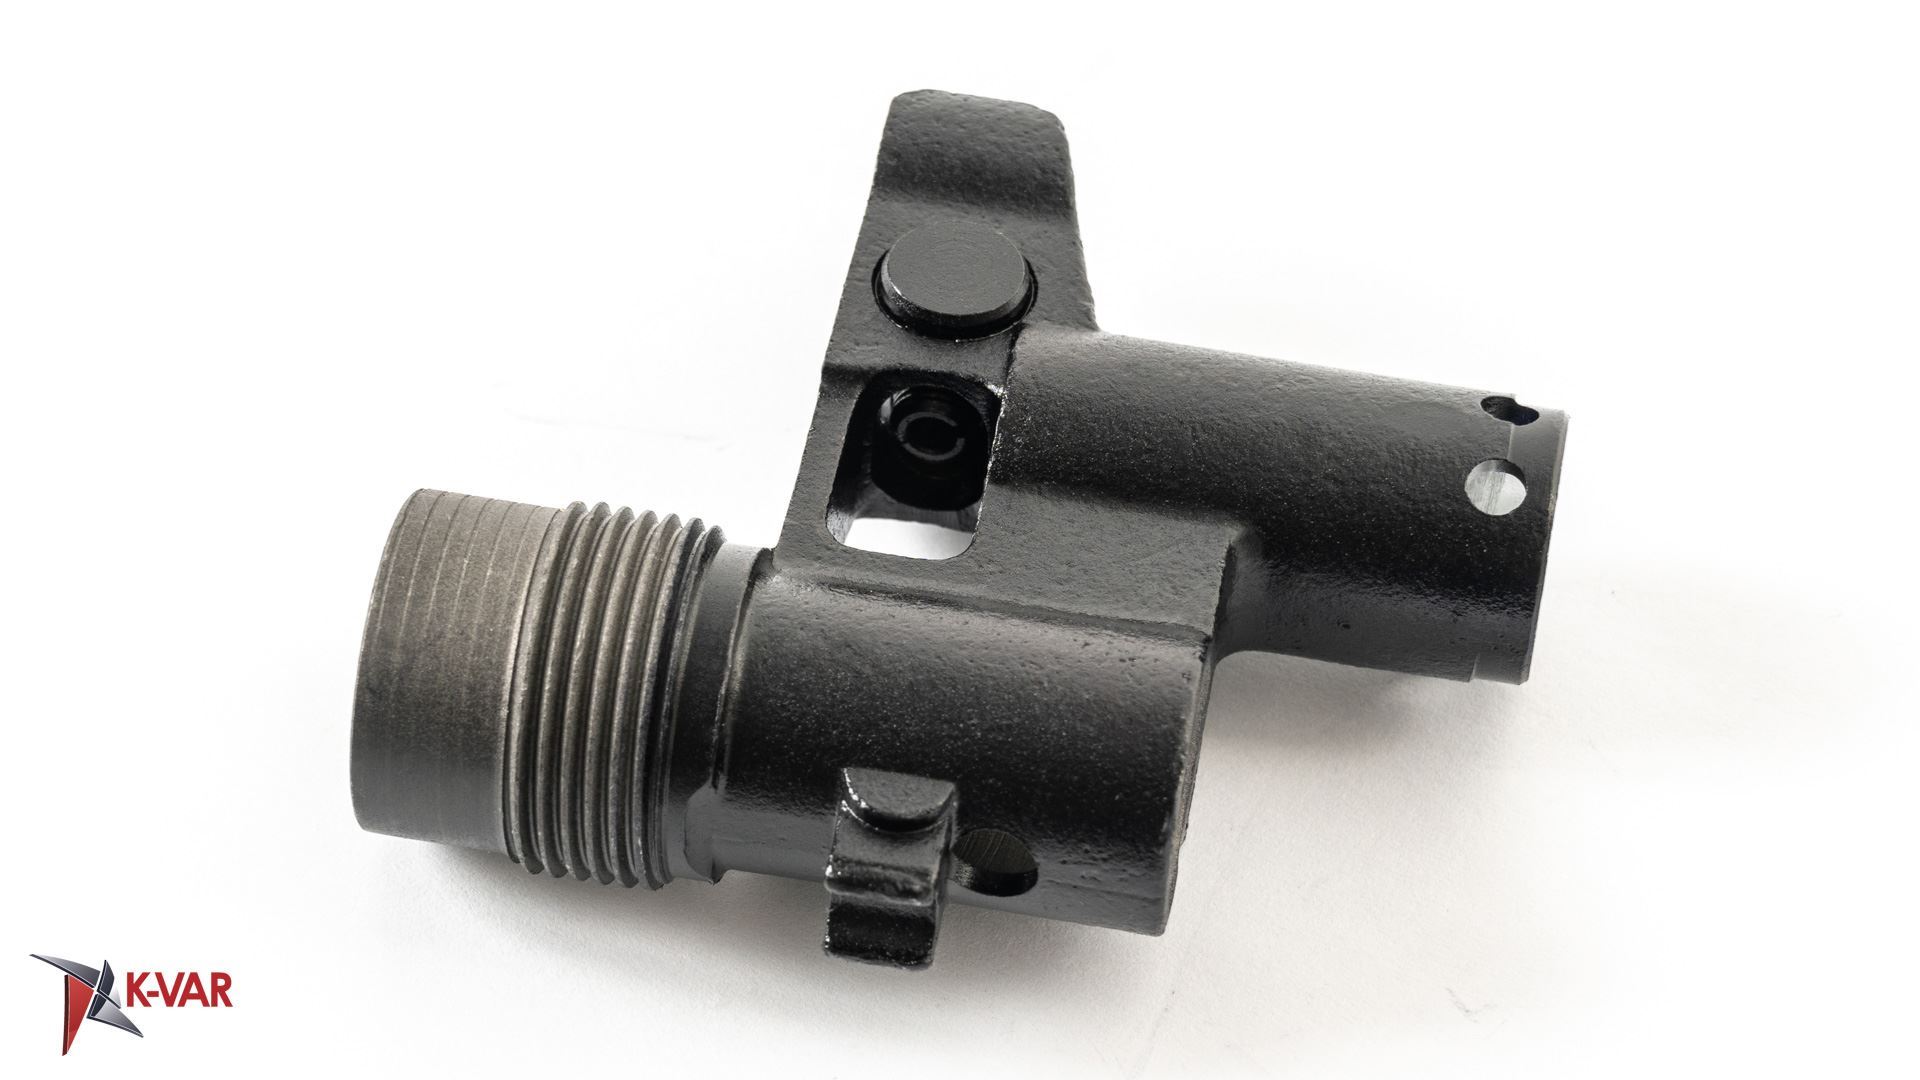 Arsenal Mil Spec Front Sight Gas Block Assembly Arsenal Block Gas Sight-img-4